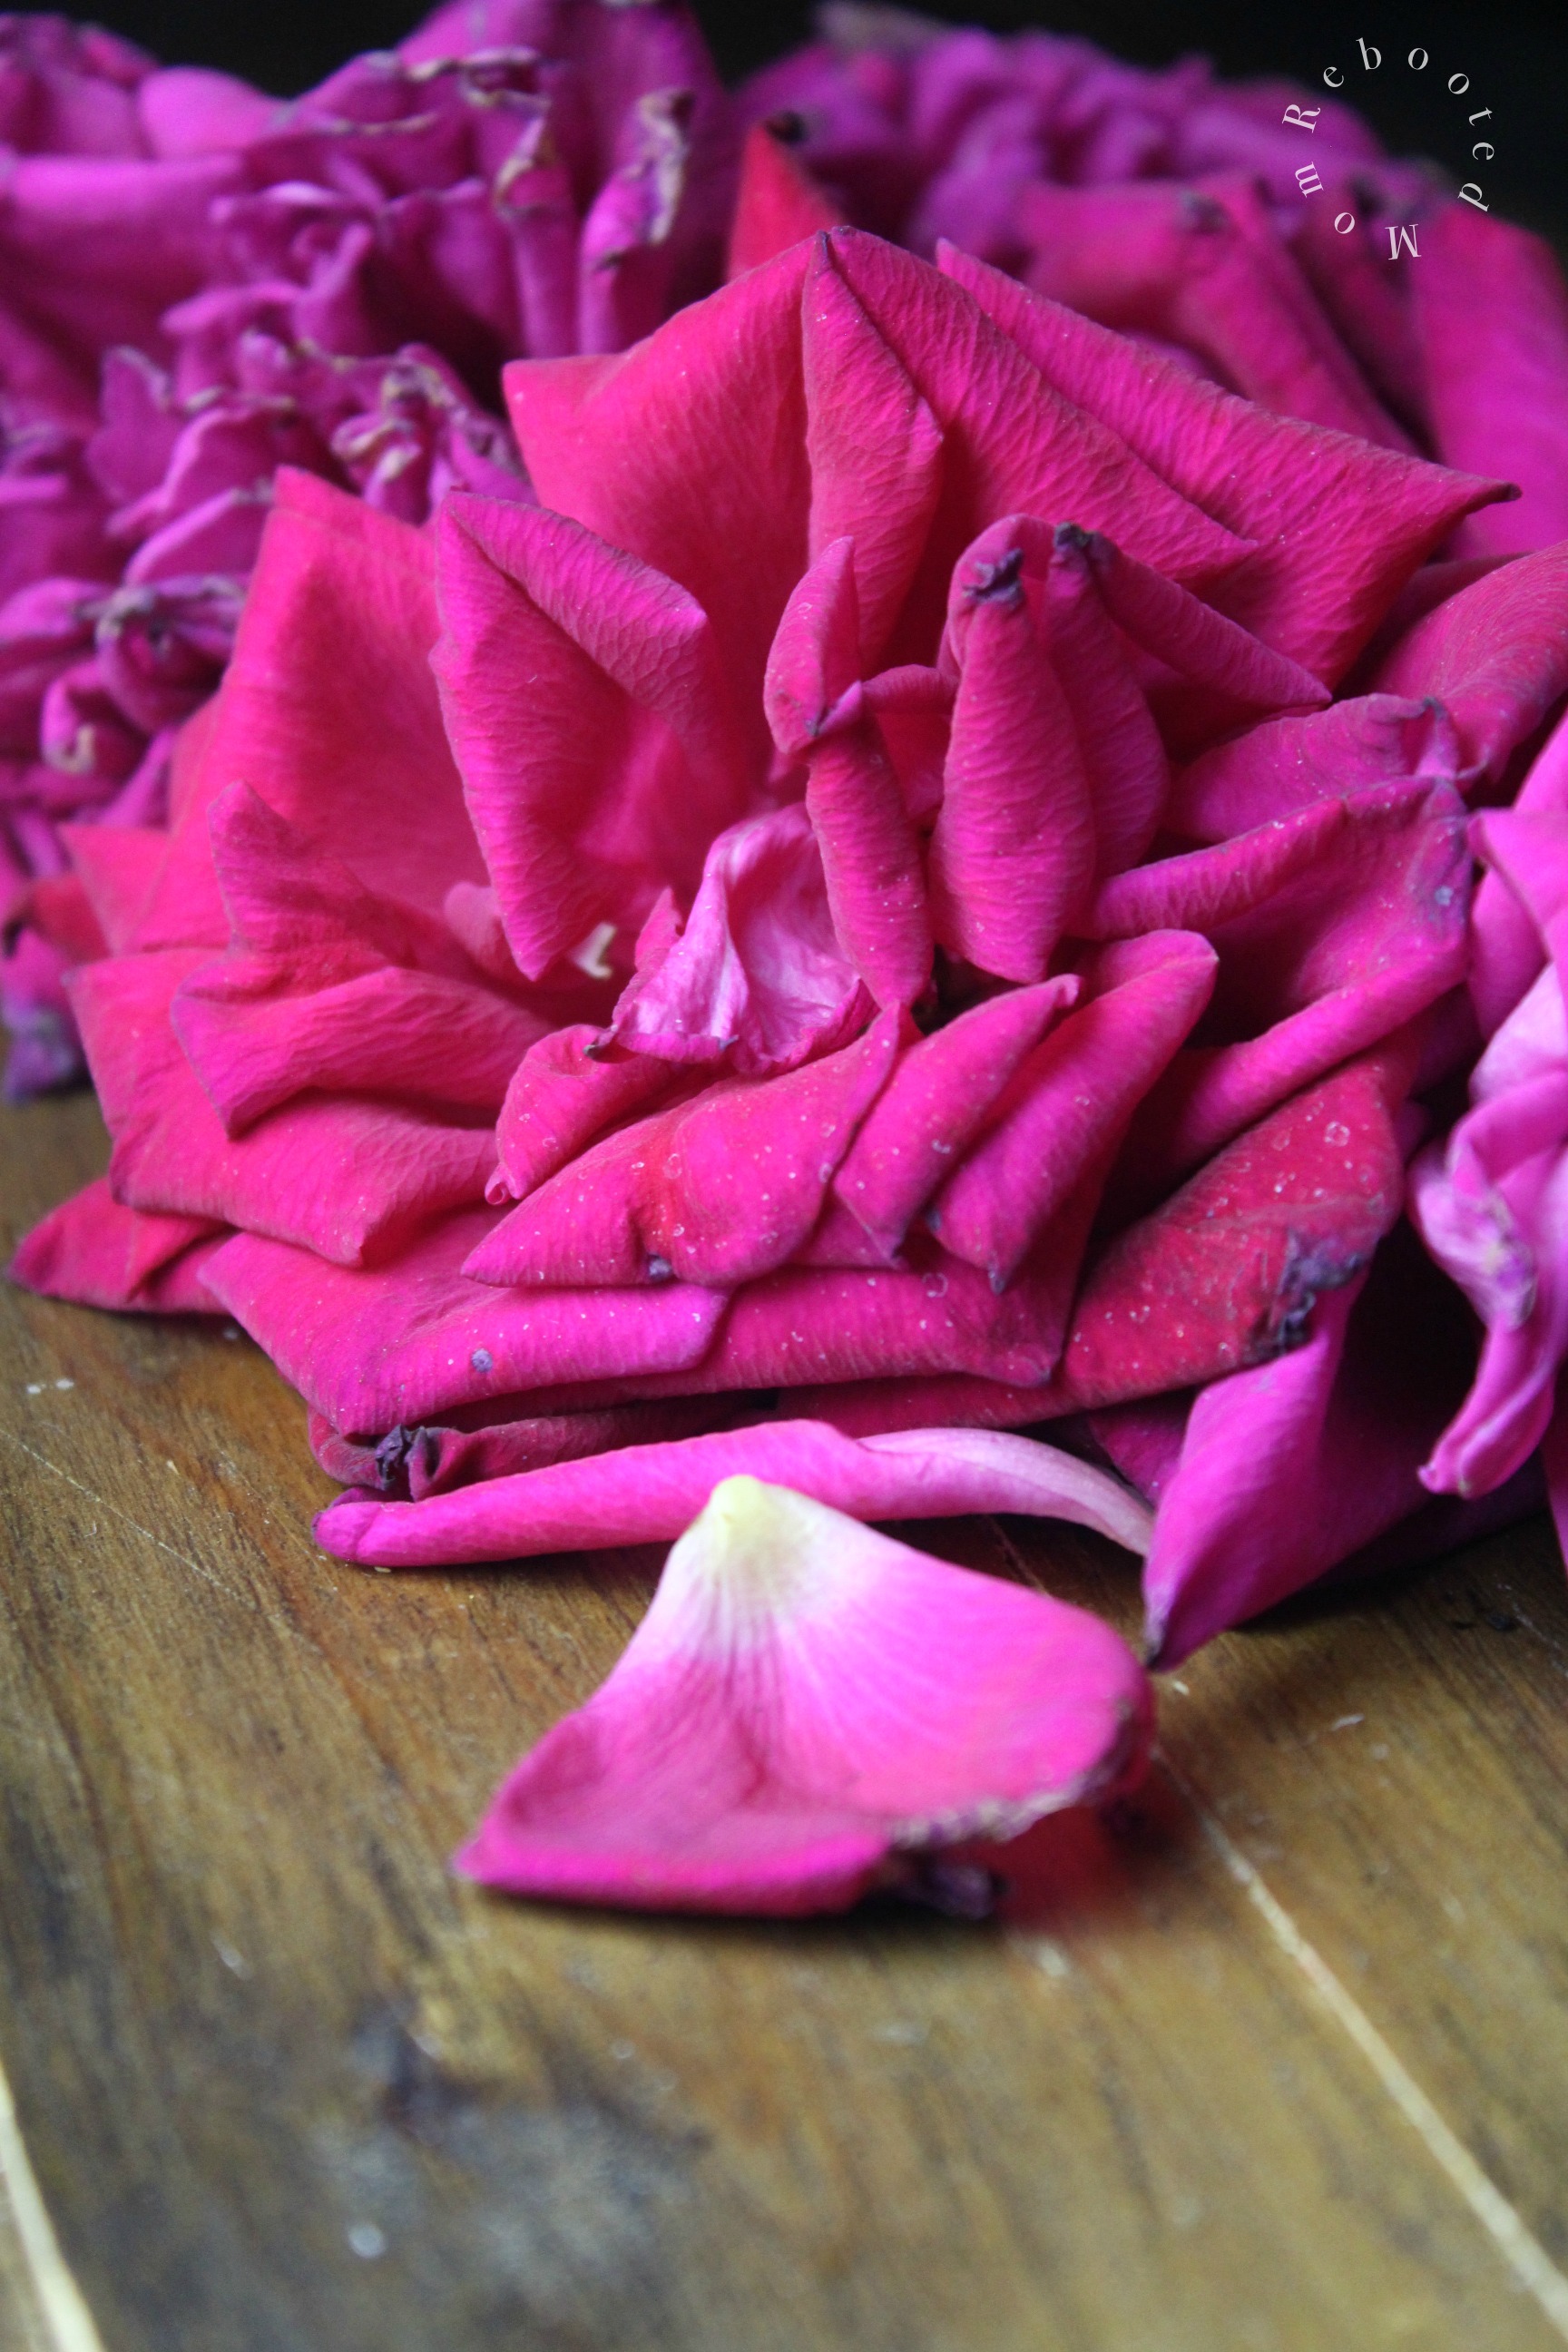 Here's everything you need to know about drying rose petals for tea, crafts and making your own rose-infused kombucha brew.